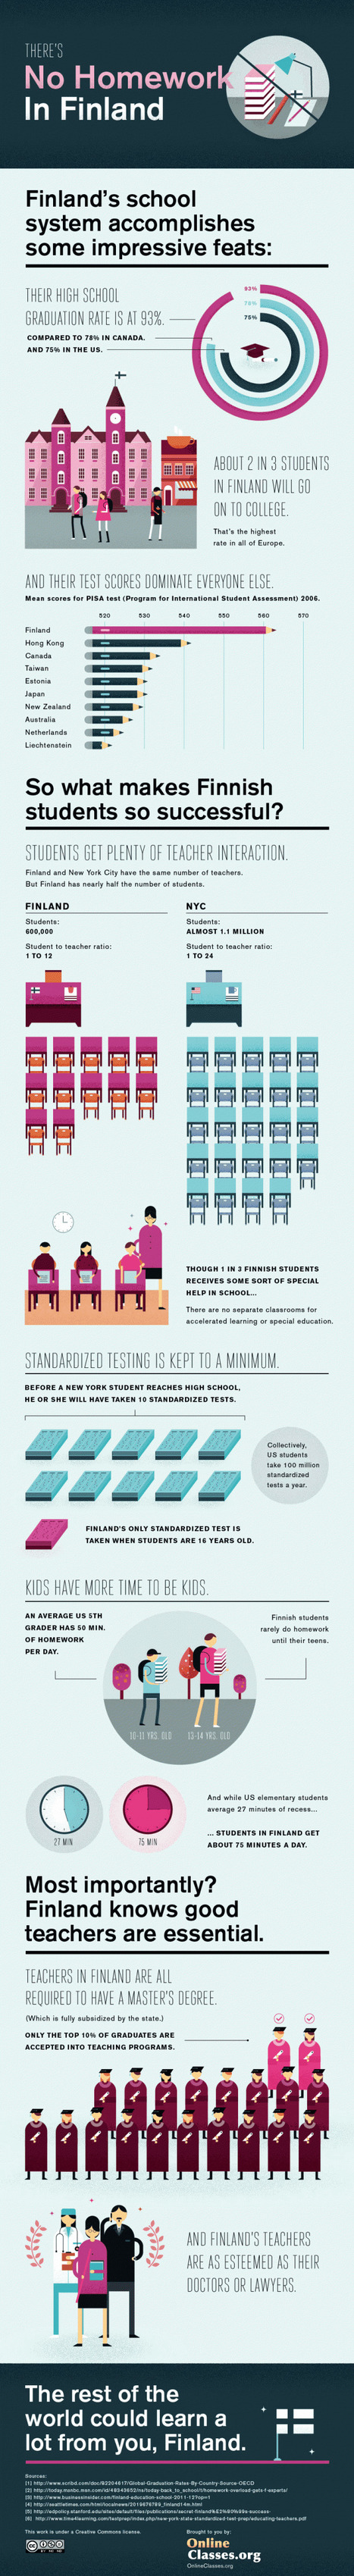 What You Should Know About Education In Finland - Infographic | Digital Delights - Digital Tribes | Scoop.it